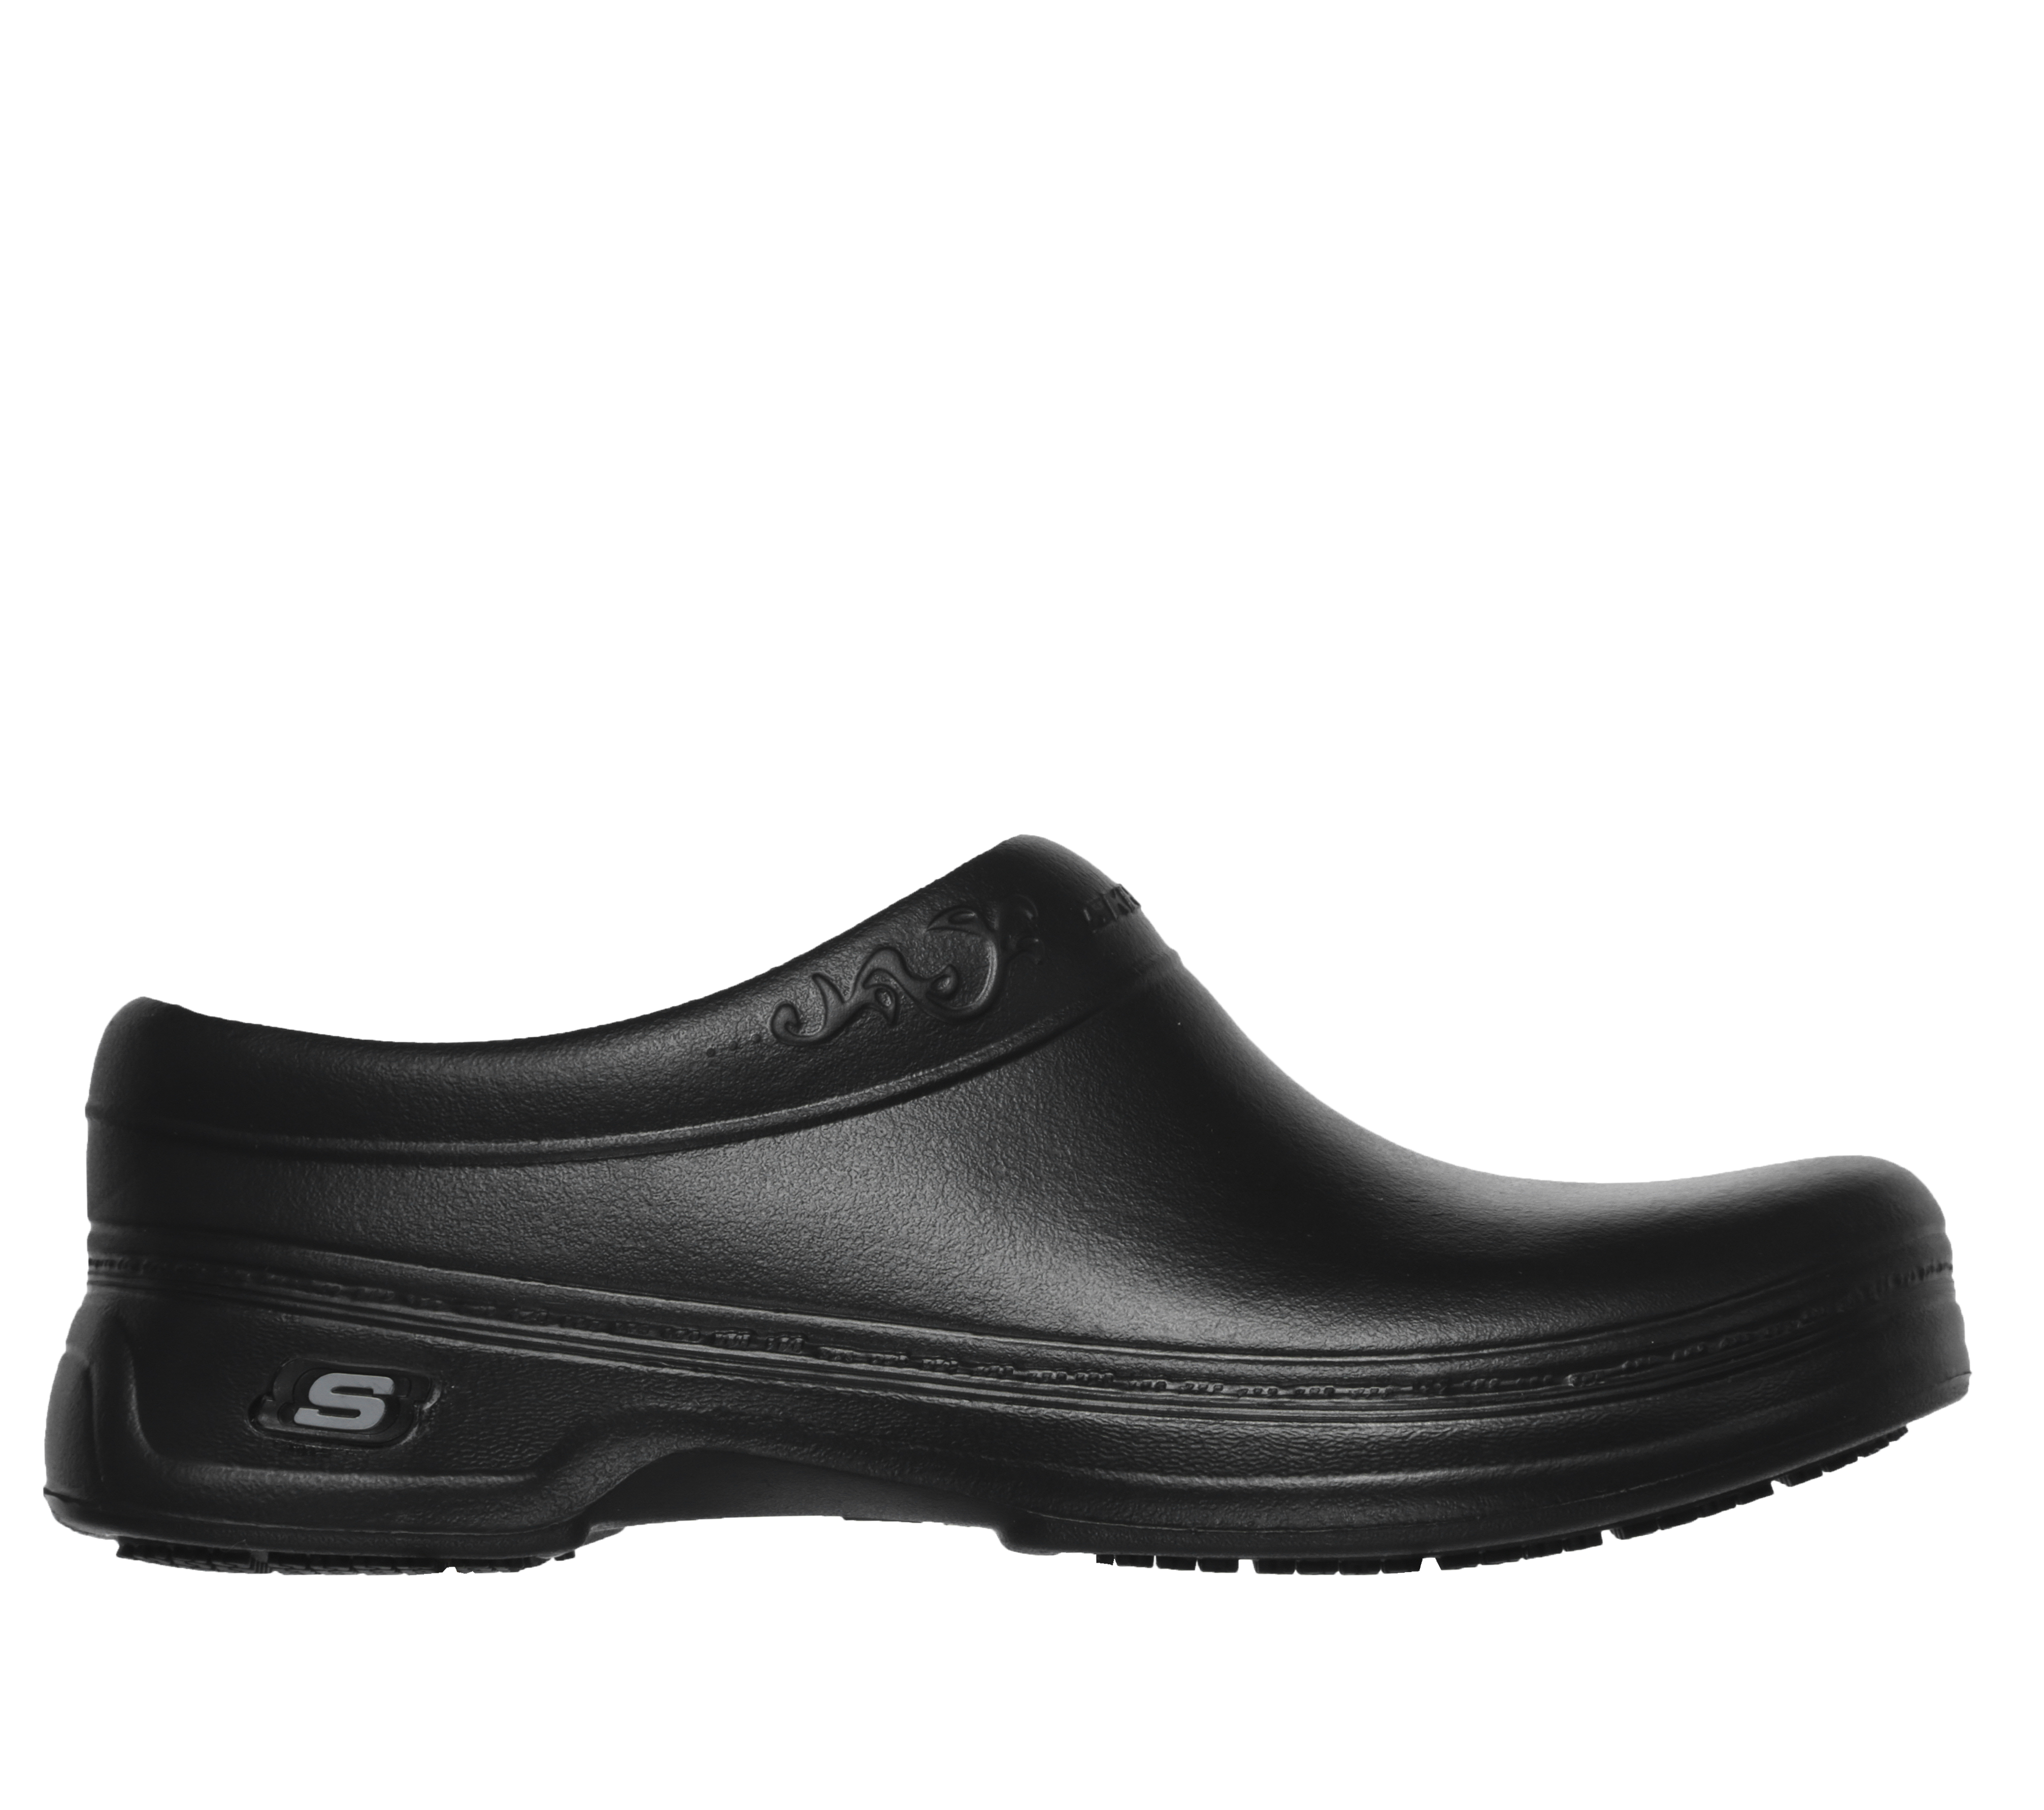 most comfortable skechers work shoes